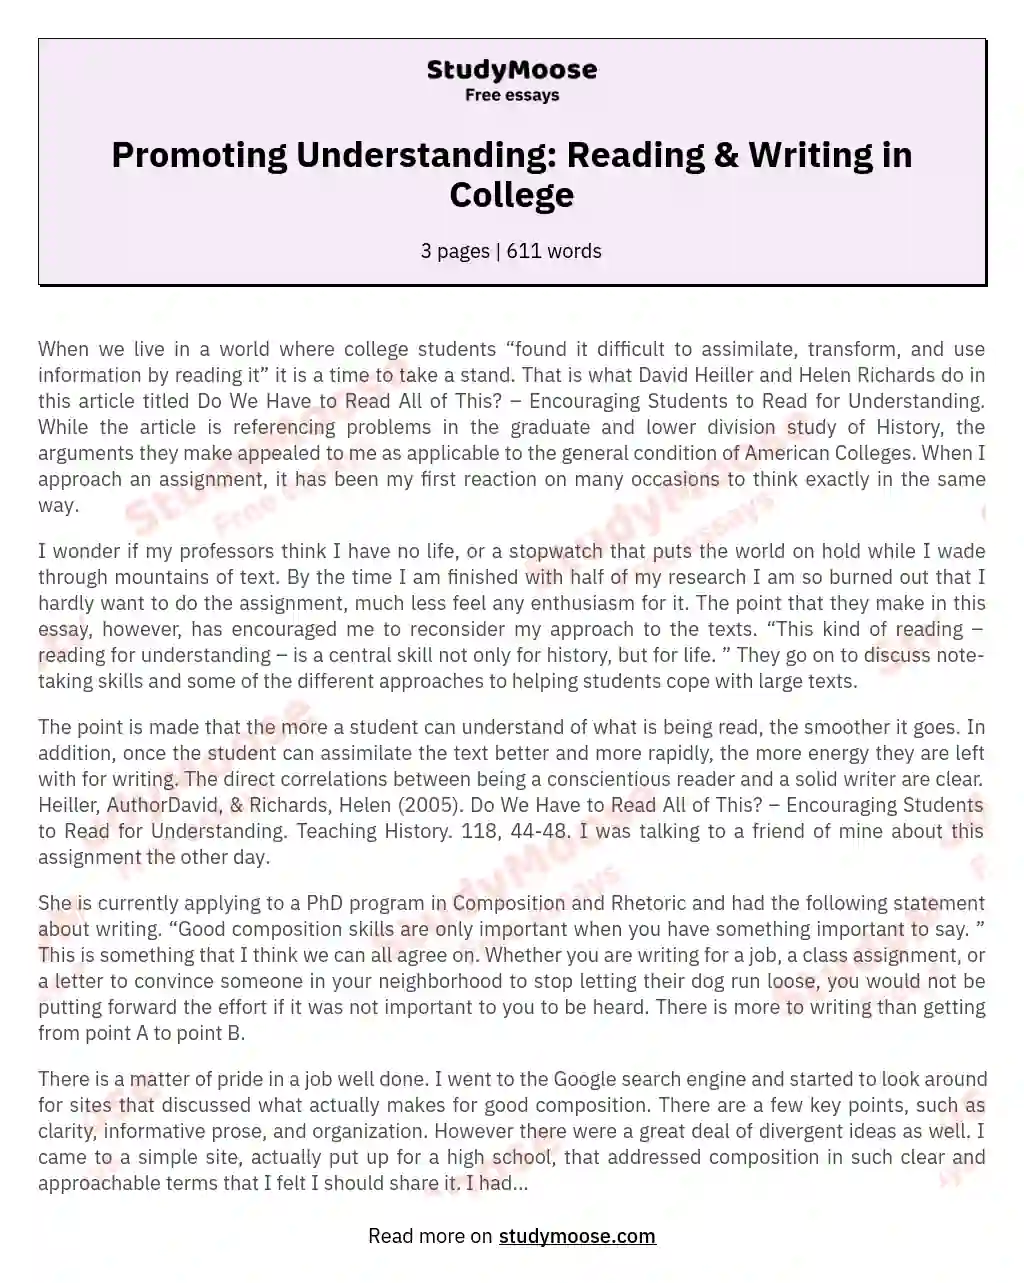 Promoting Understanding: Reading & Writing in College essay